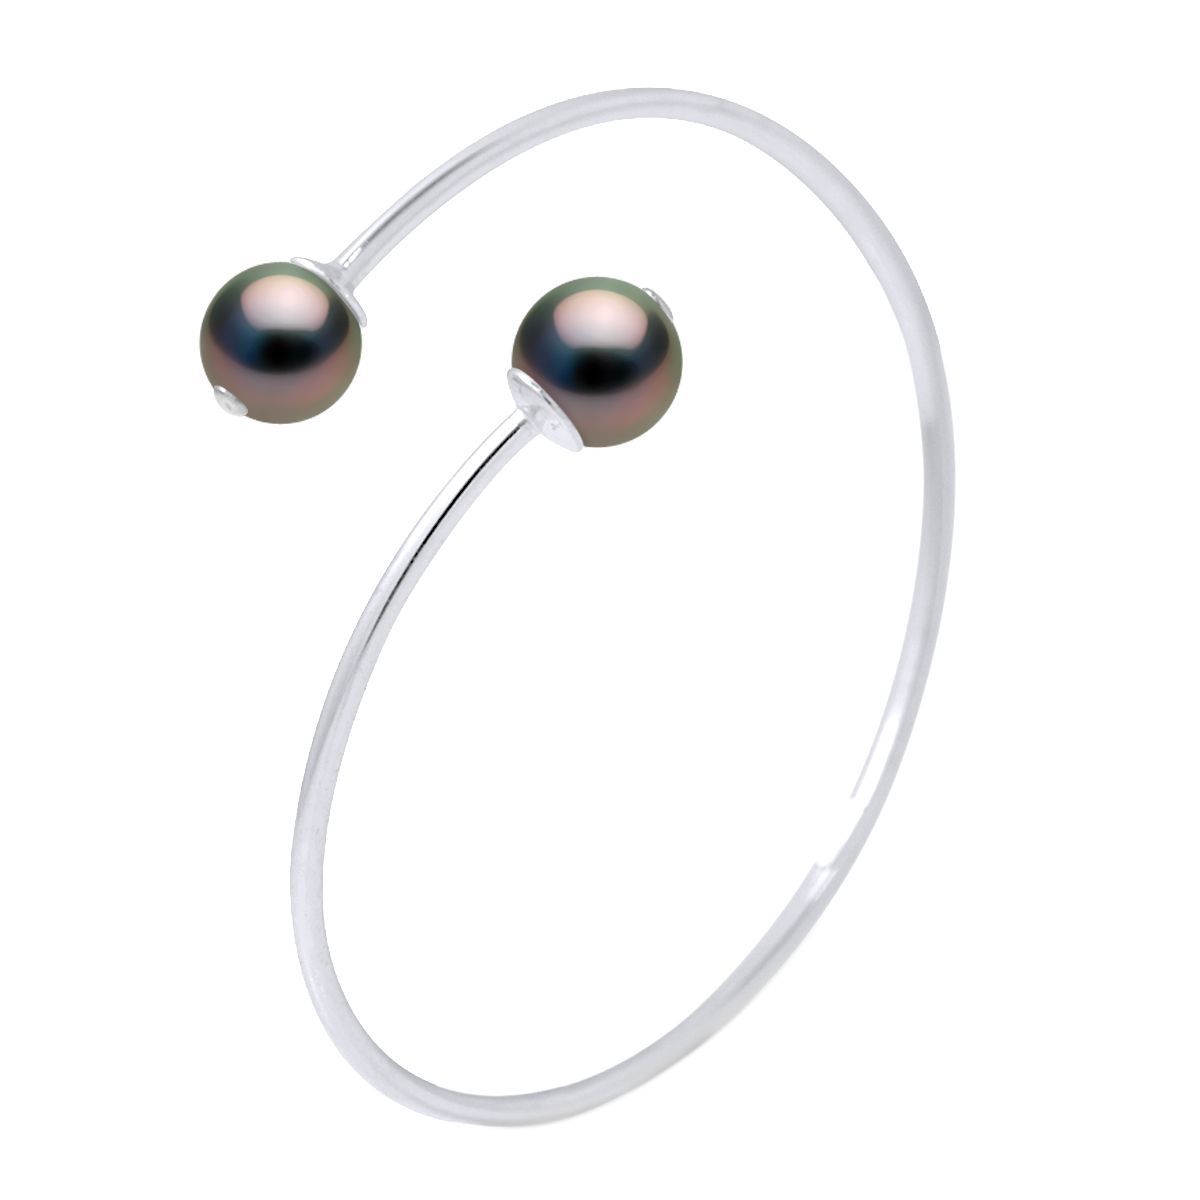 Bracelet YOU & I 925 Sterling Silver of 2 true Cultured Rounded Tahitian Pearl 9-10 mm Adjustable size - Our jewellery is made in France and will be delivered in a gift box accompanied by a Certificate of Authenticity and International Warranty